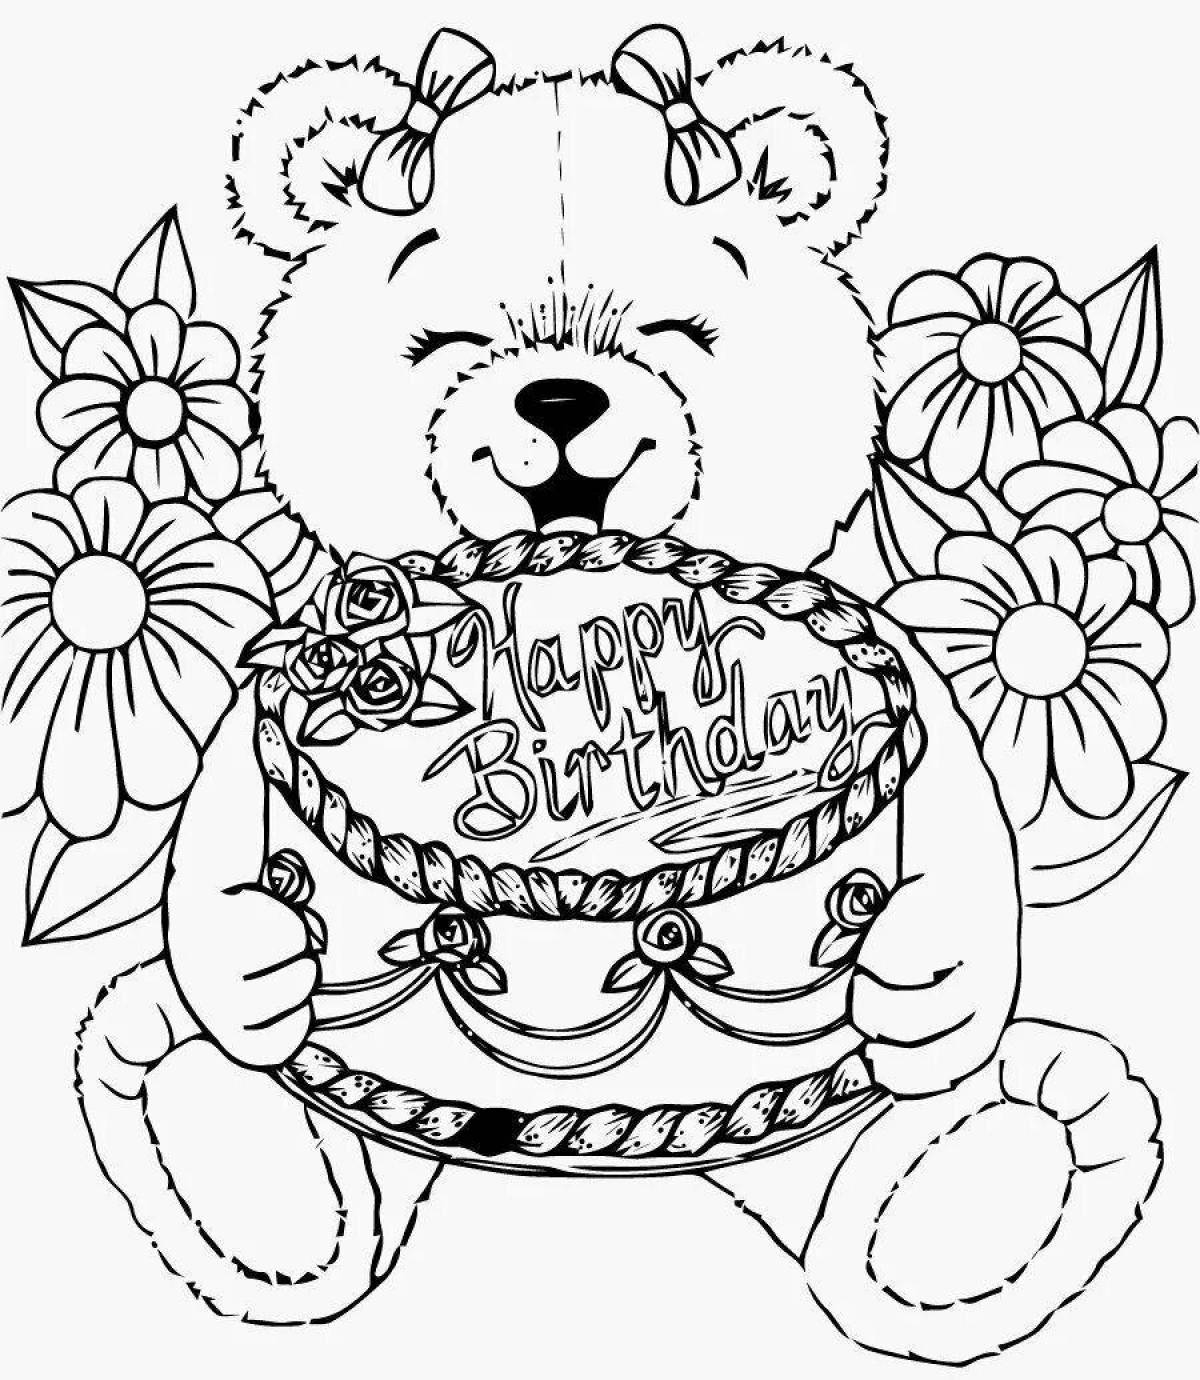 Happy anniversary glowing coloring page